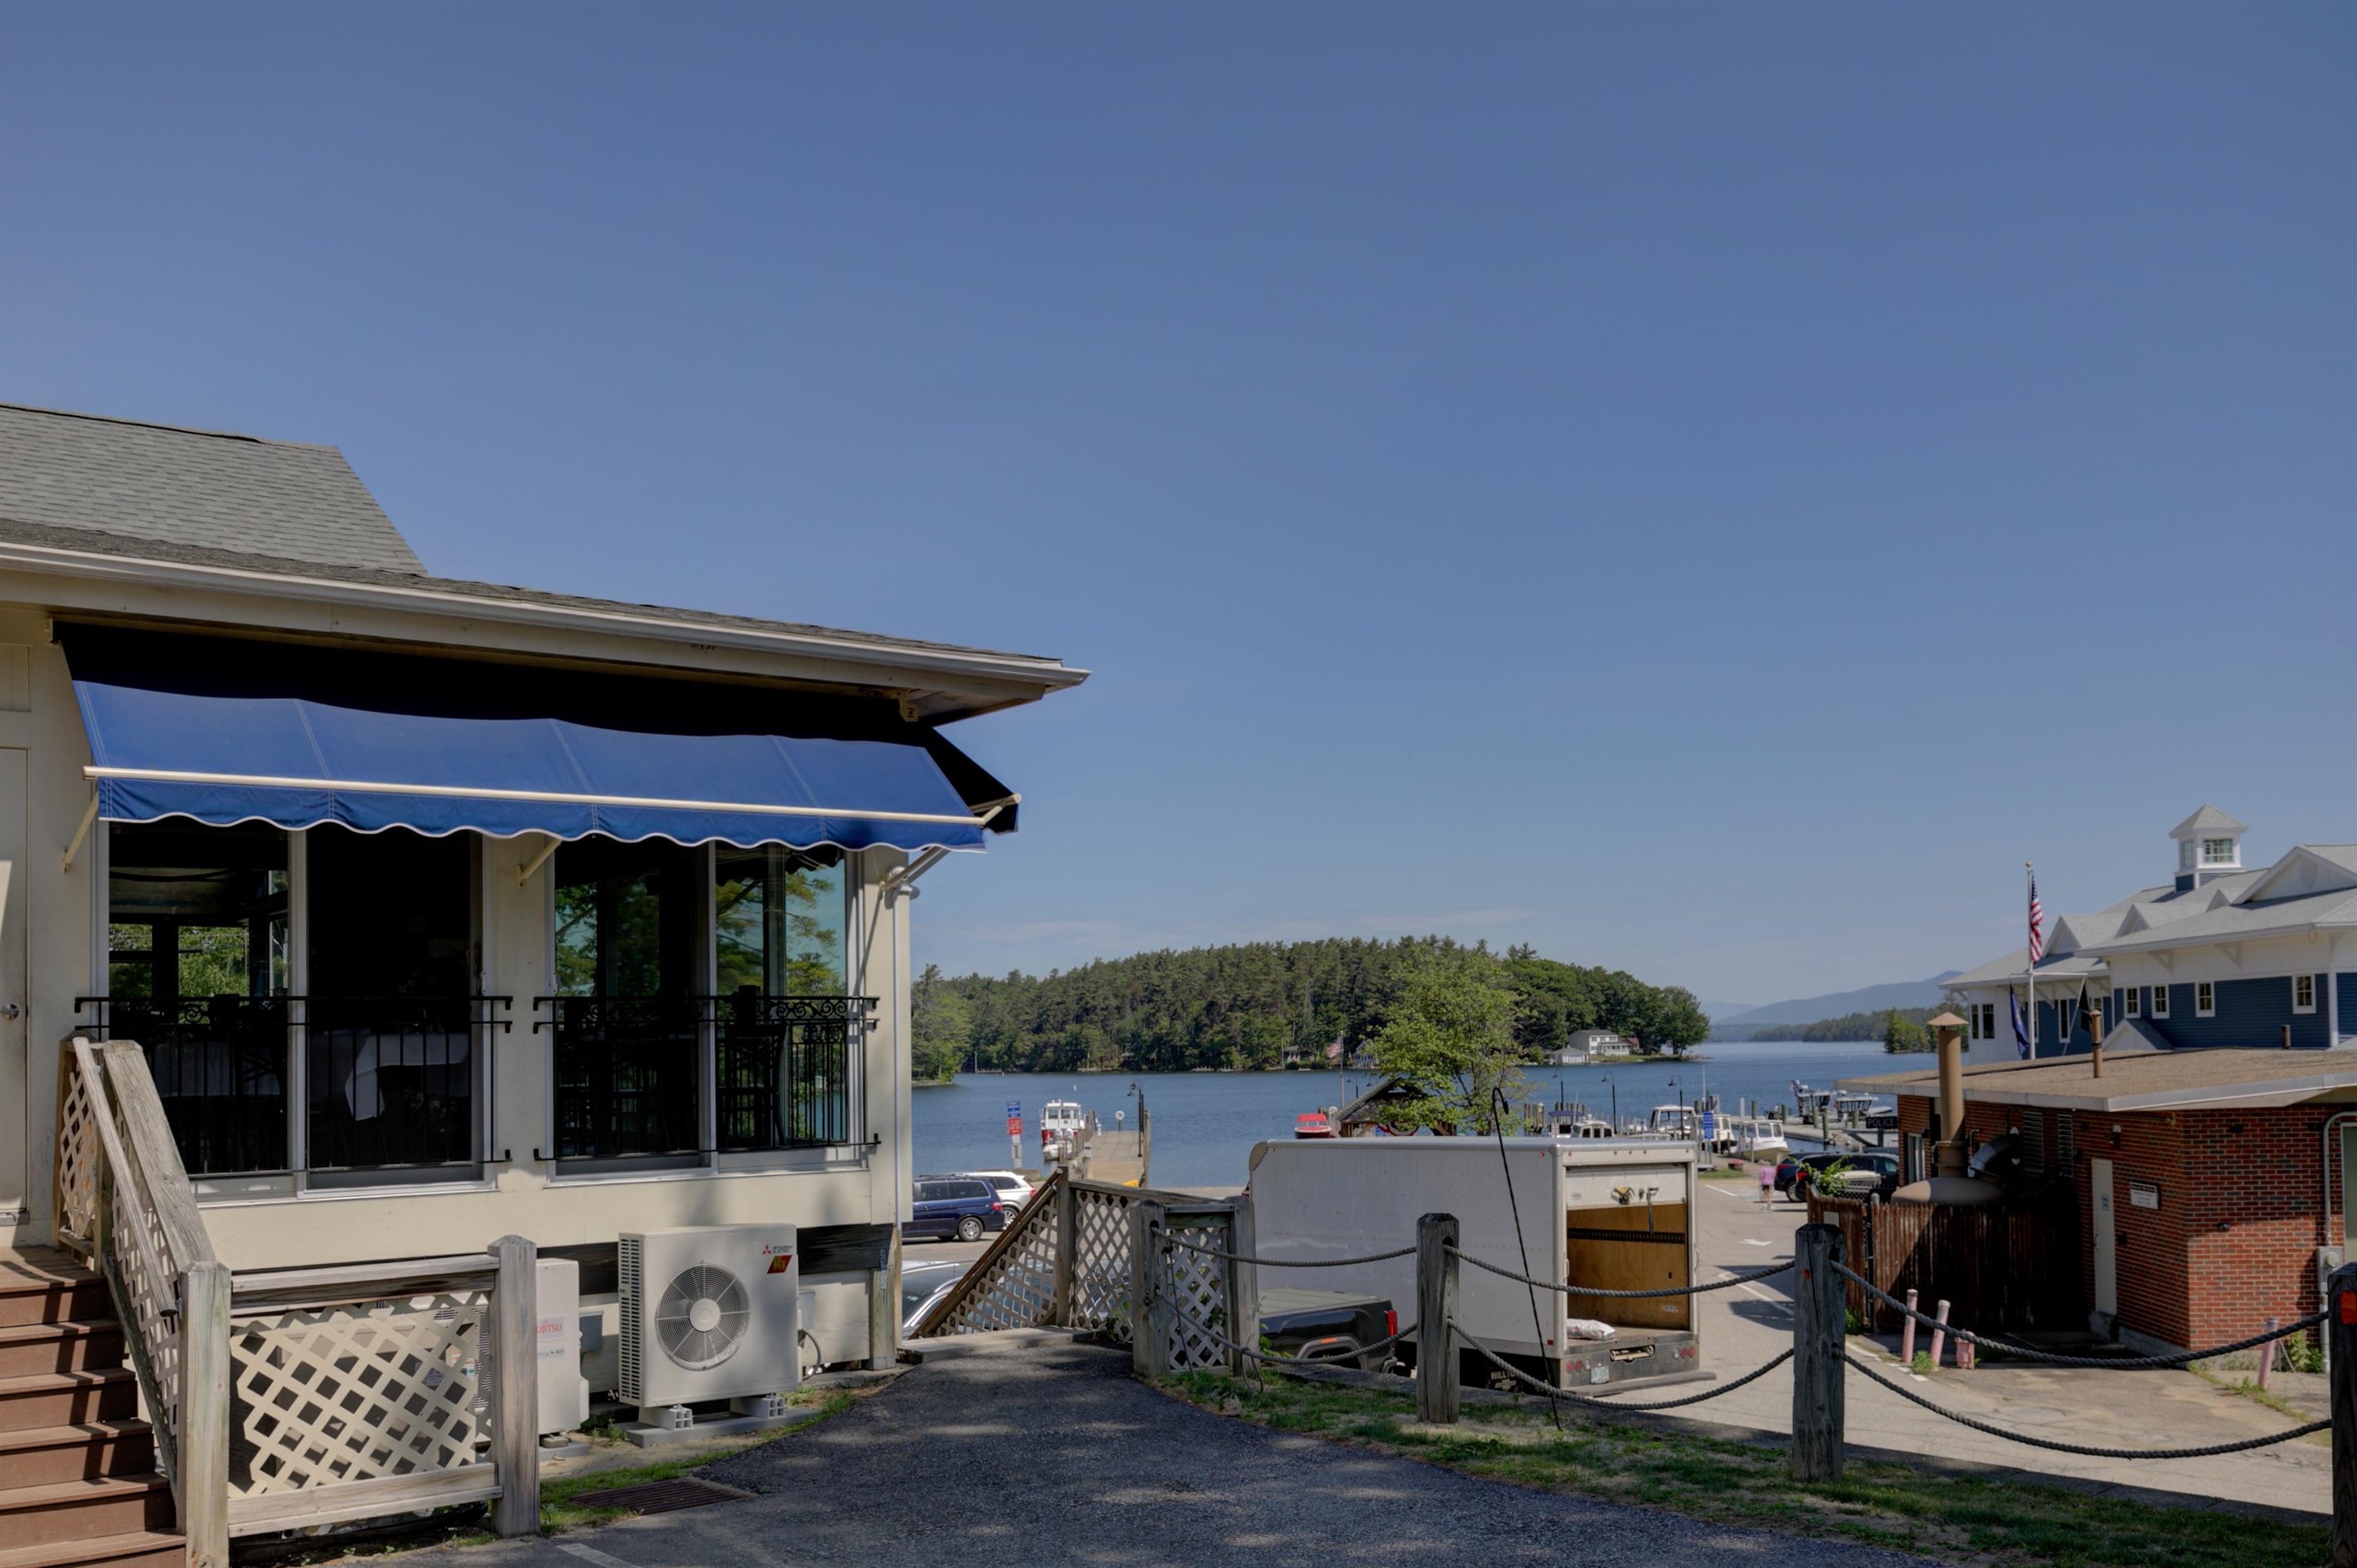 The lakeside restaurant  "Breezies" is just a a couple hundred yards from 41 Glendale Place